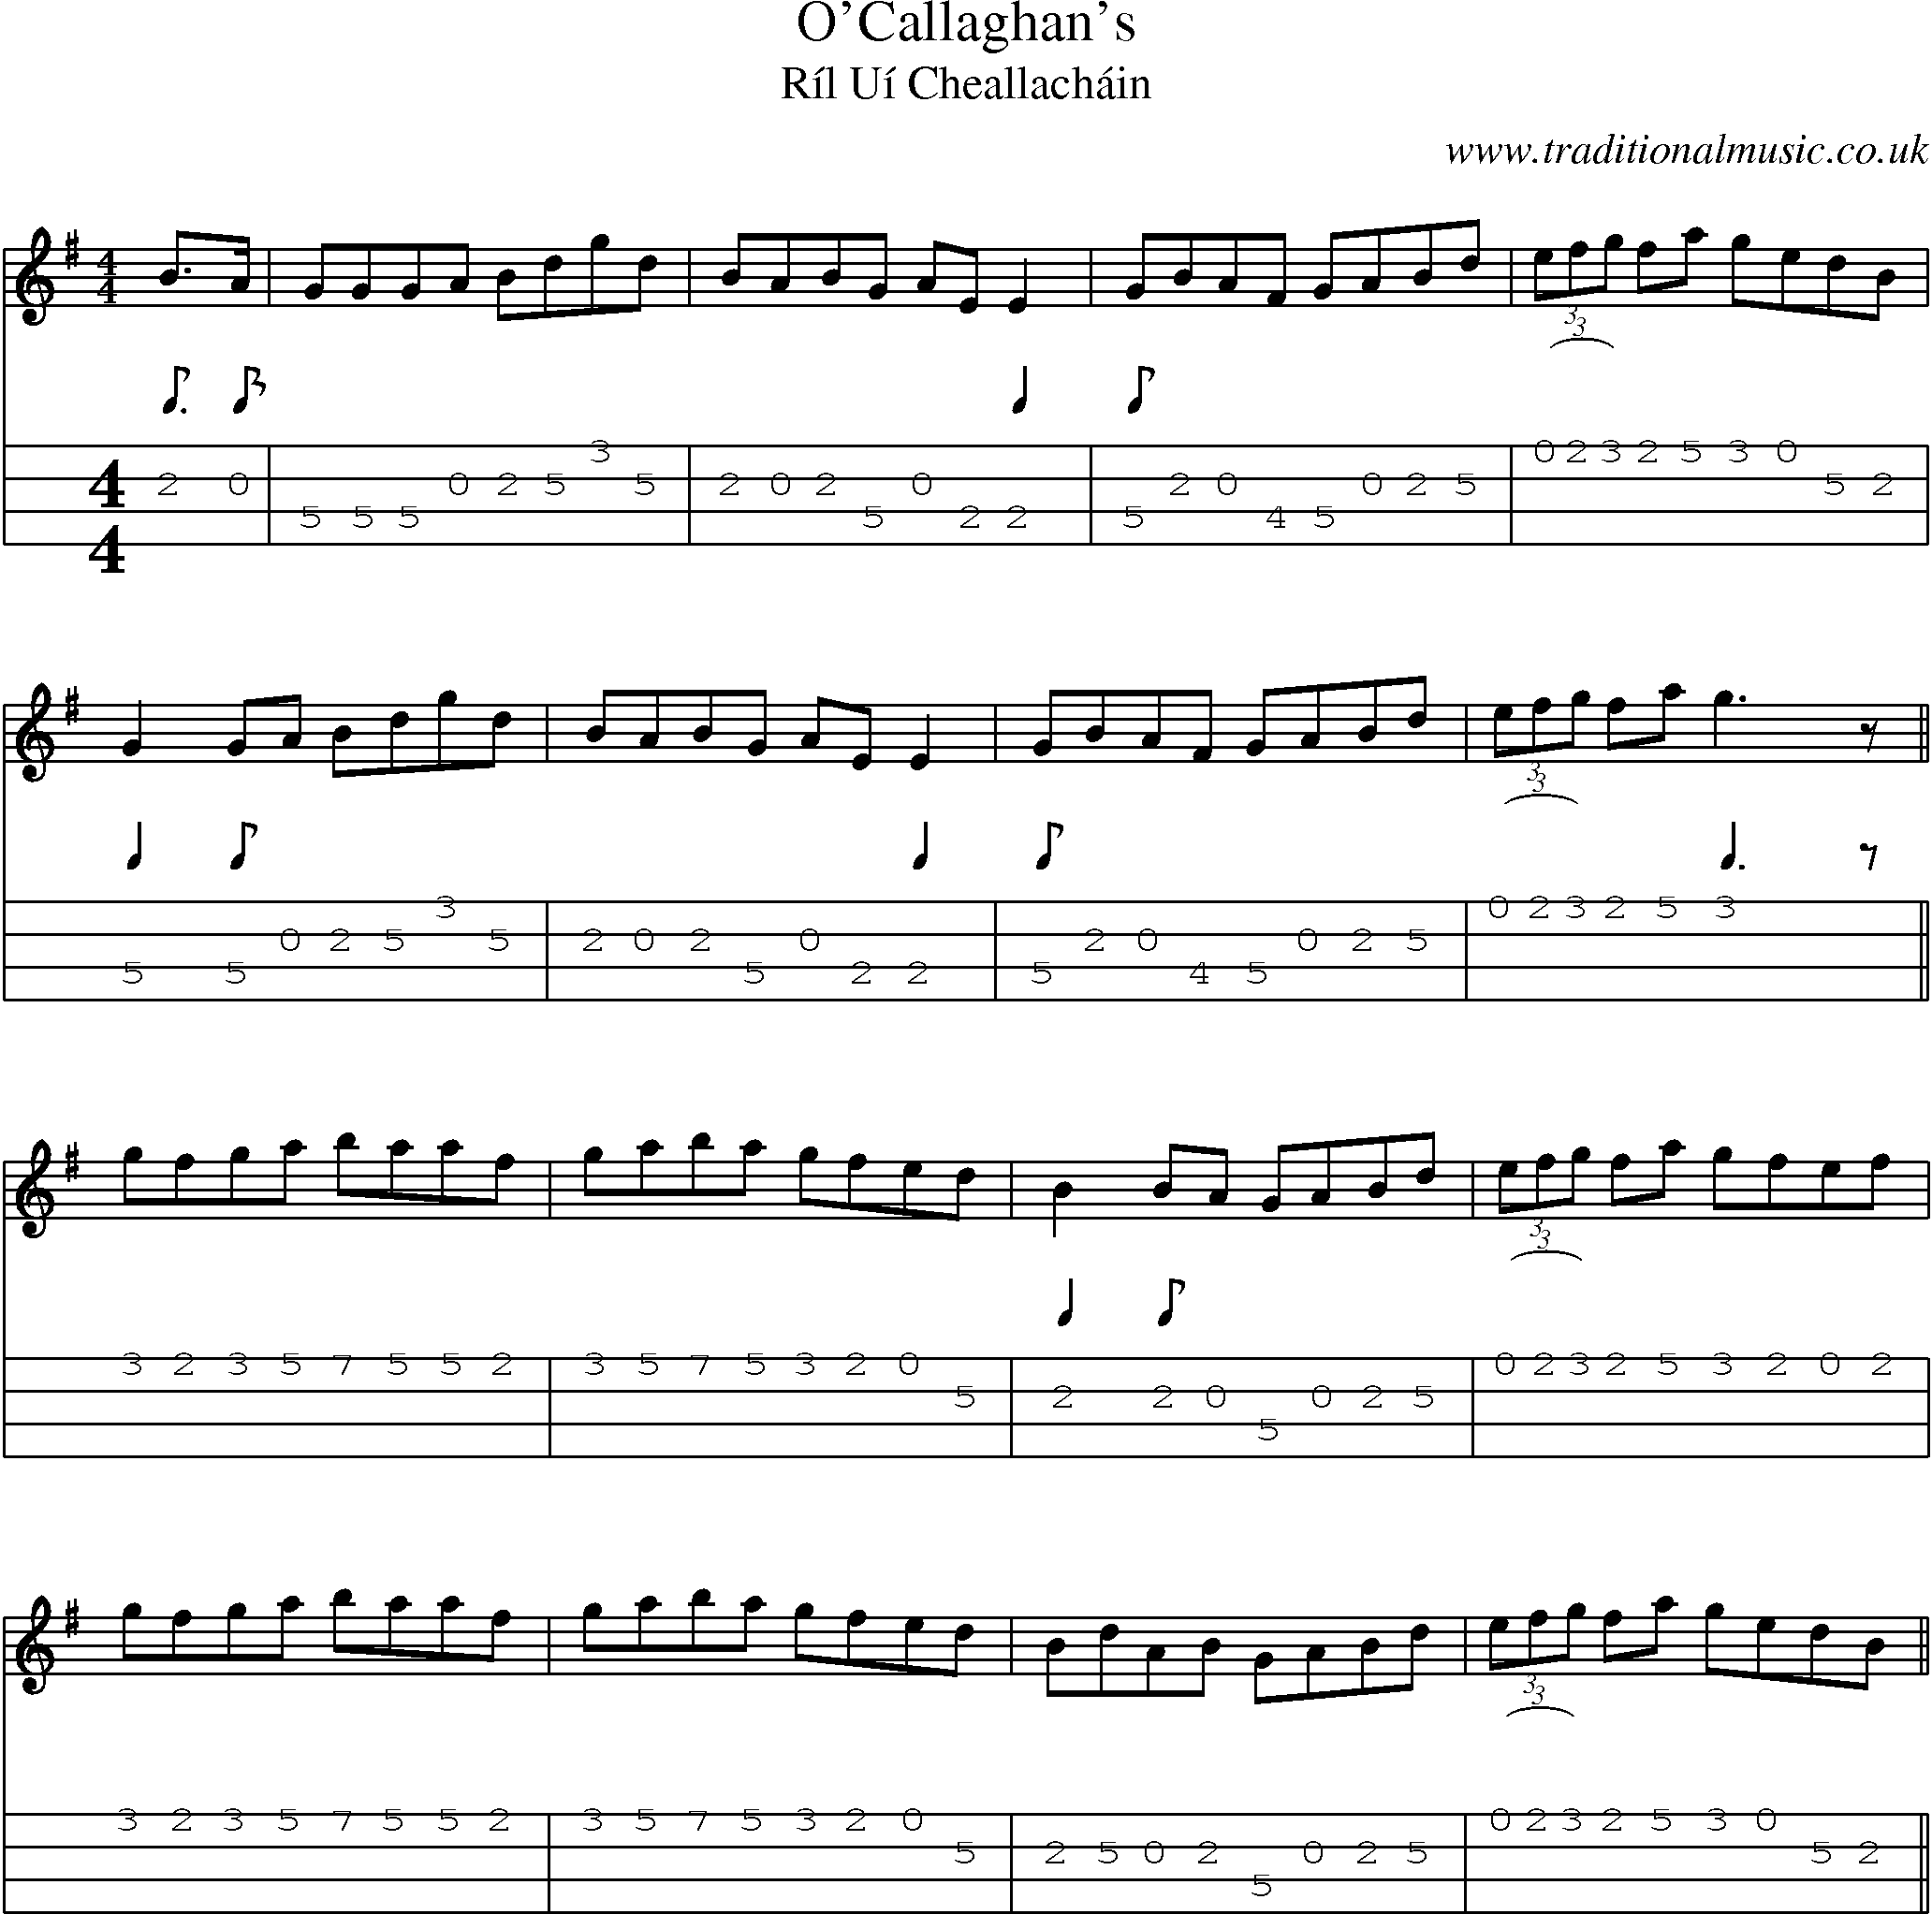 Music Score and Mandolin Tabs for Ocallaghans